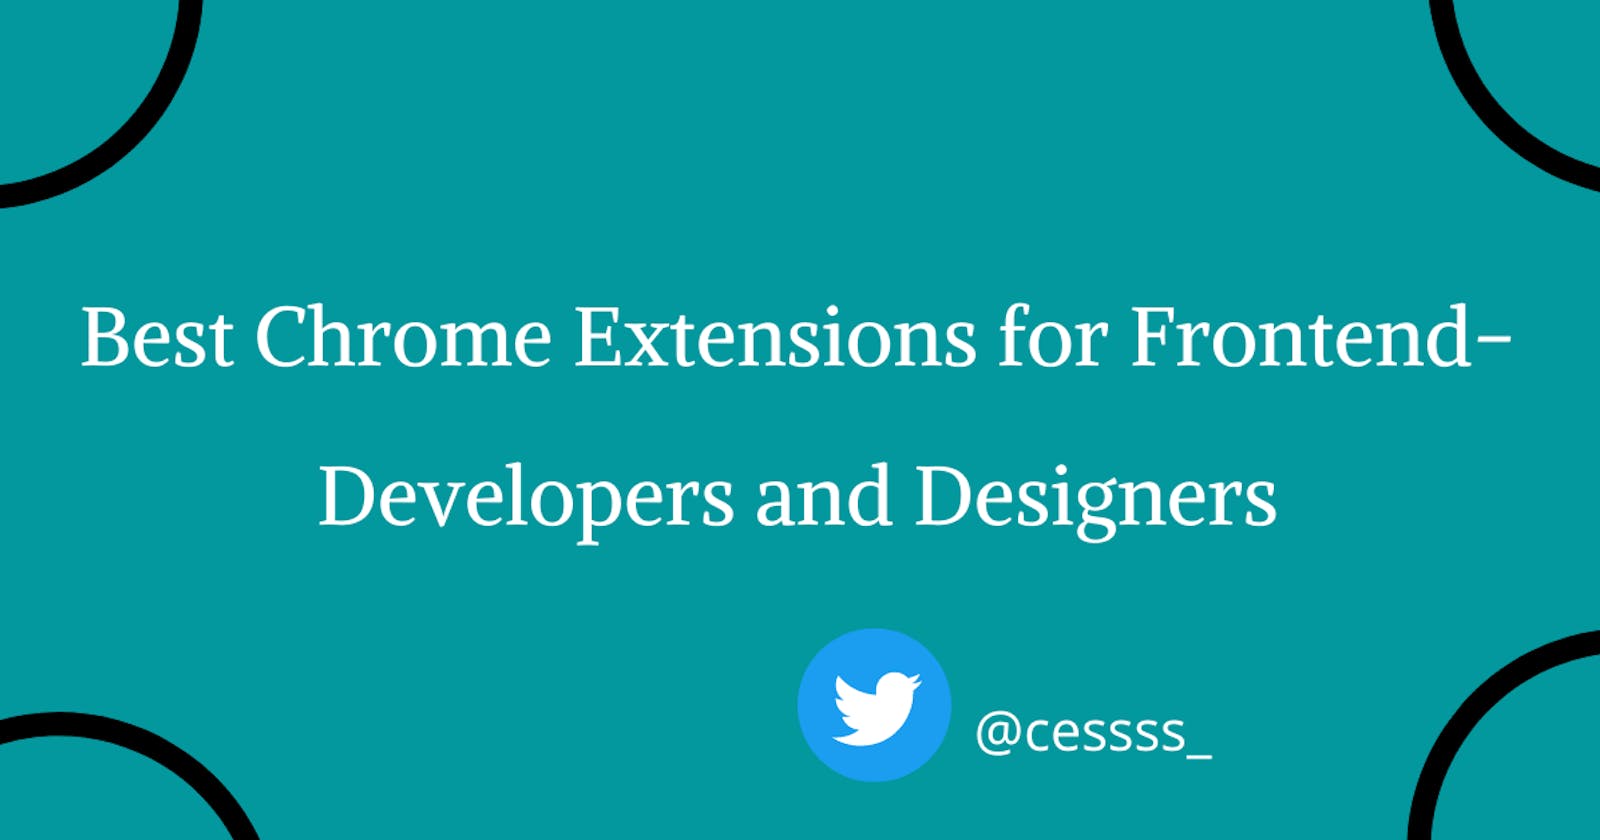 Best Chrome Extensions for Frontend-Developers and Designers